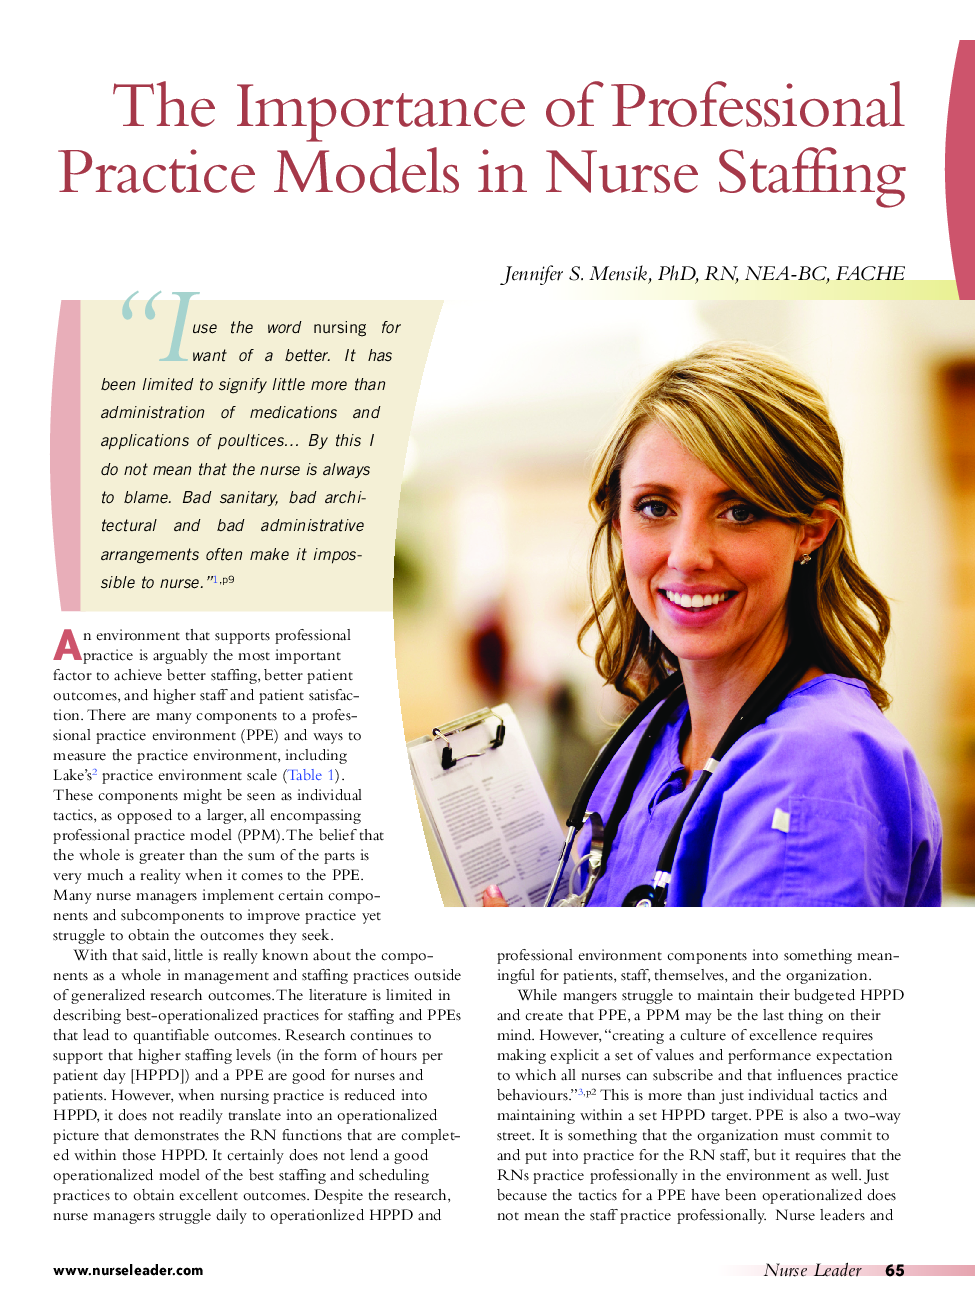 The Importance of Professional Practice Models in Nurse Staffing